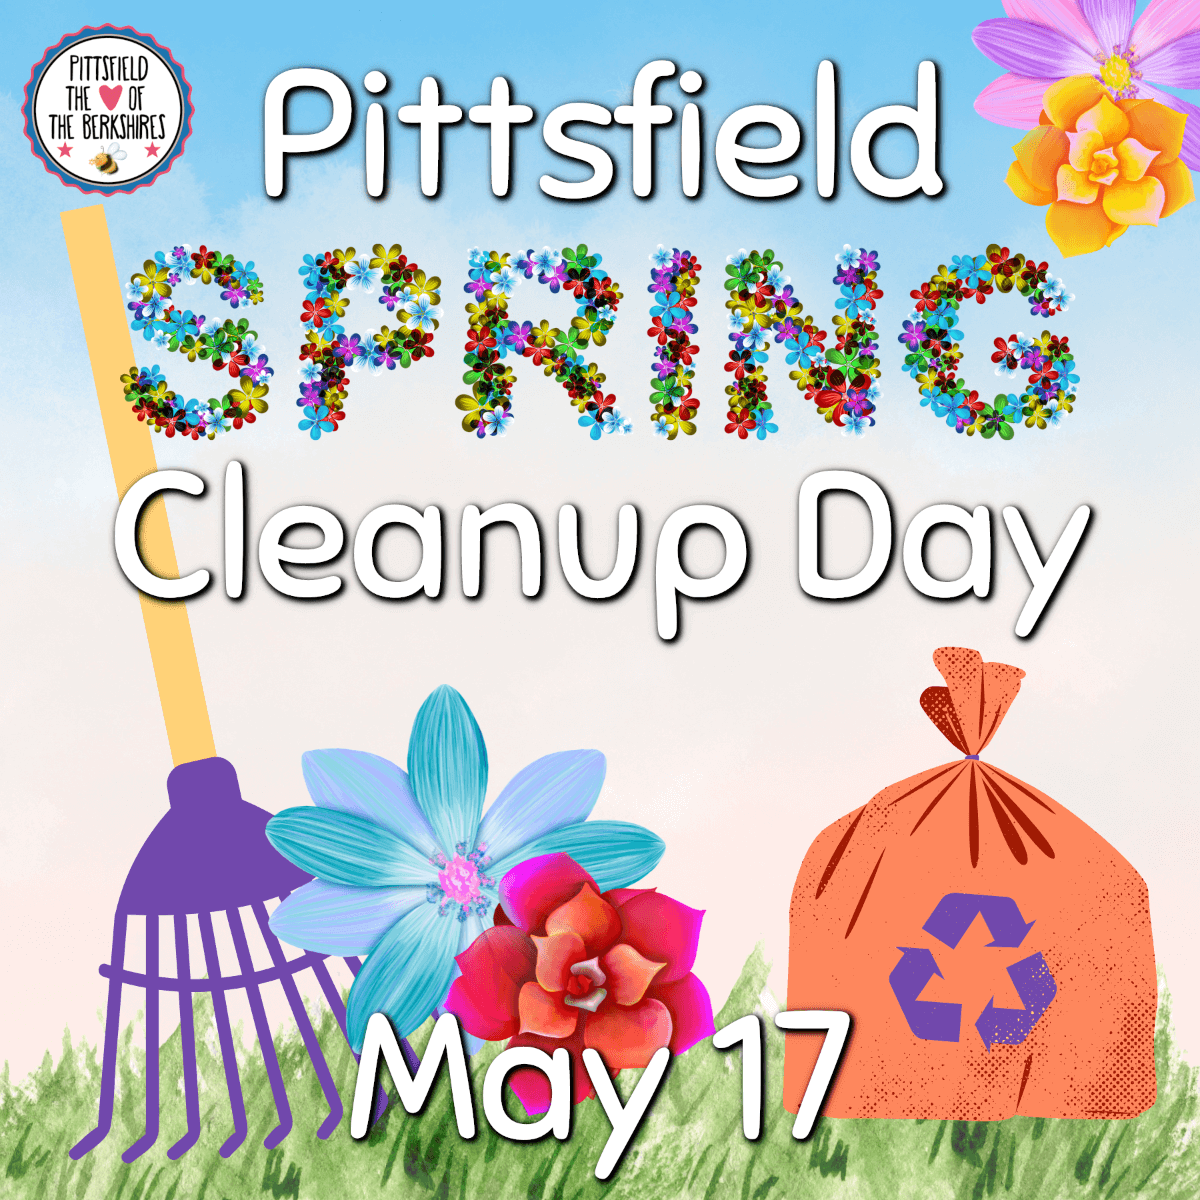 Downtown Pittsfield Cleanup day is May 17